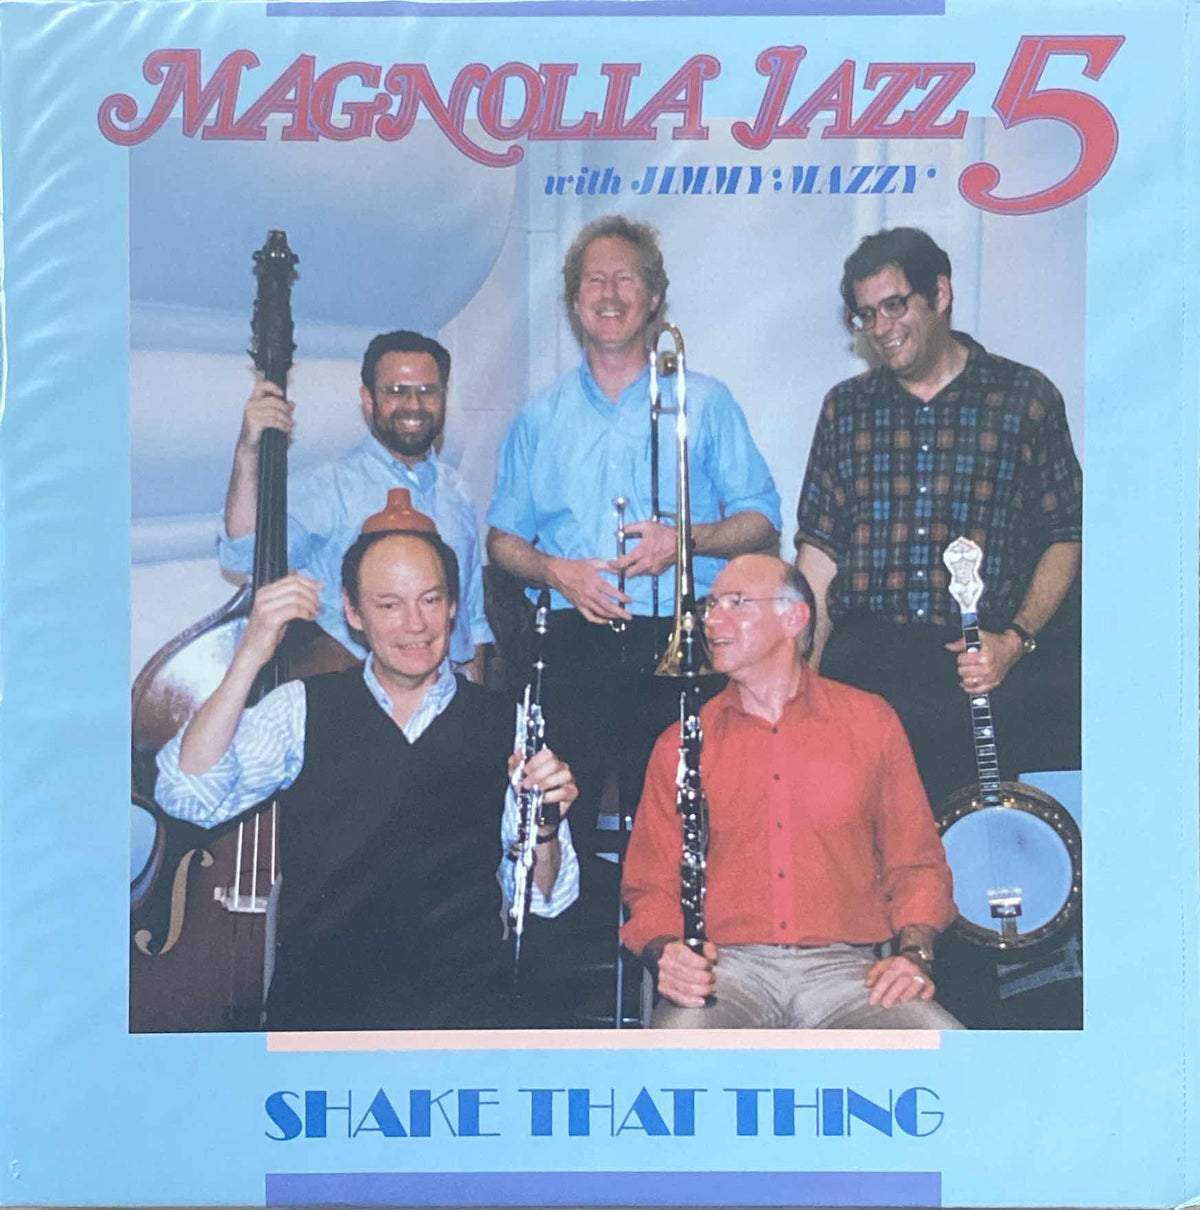 Album cover for "Jimmy Mazzy and Magnolia Jazz 5- Shake That Thing" by Tandem Coffee Roasters featuring five male musicians with various instruments like a banjo-playing and clarinets, smiling against.